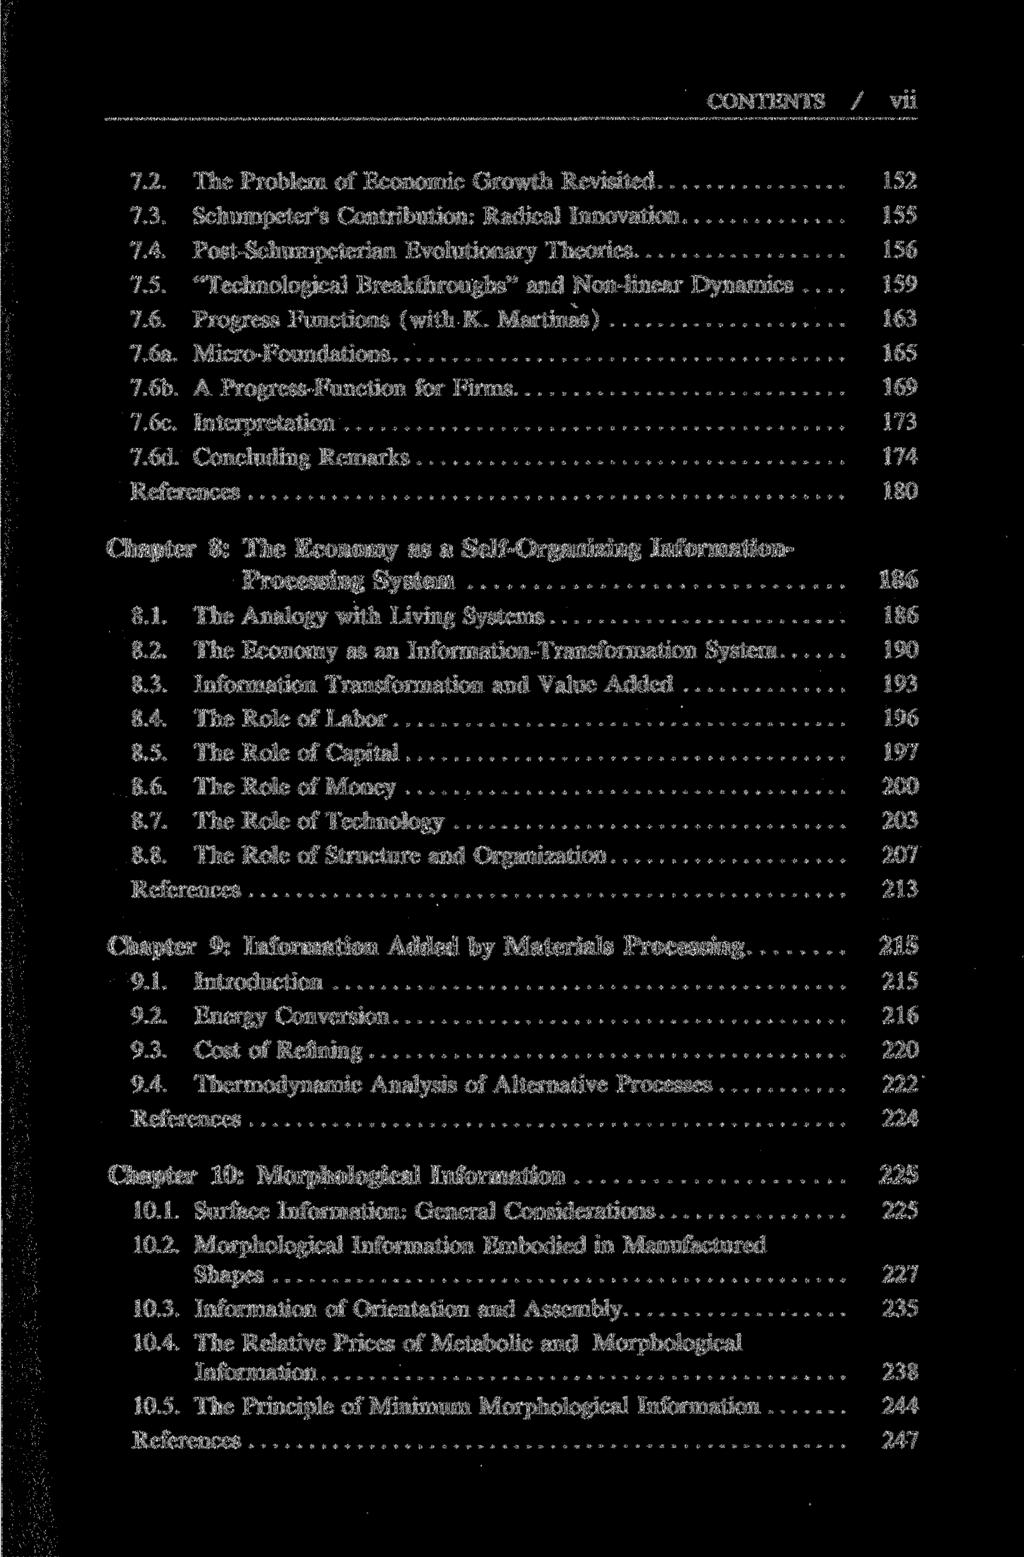 CONTENTS / VÜ 7.2. The Problem of Economic Growth Revisited 152 7.3. Schumpeter's Contribution: Radical Innovation 155 7.4. Post-Schumpeterian Evolutionary Theories 156 7.5. "Technological Breakthroughs" and Non-linear Dynamics.